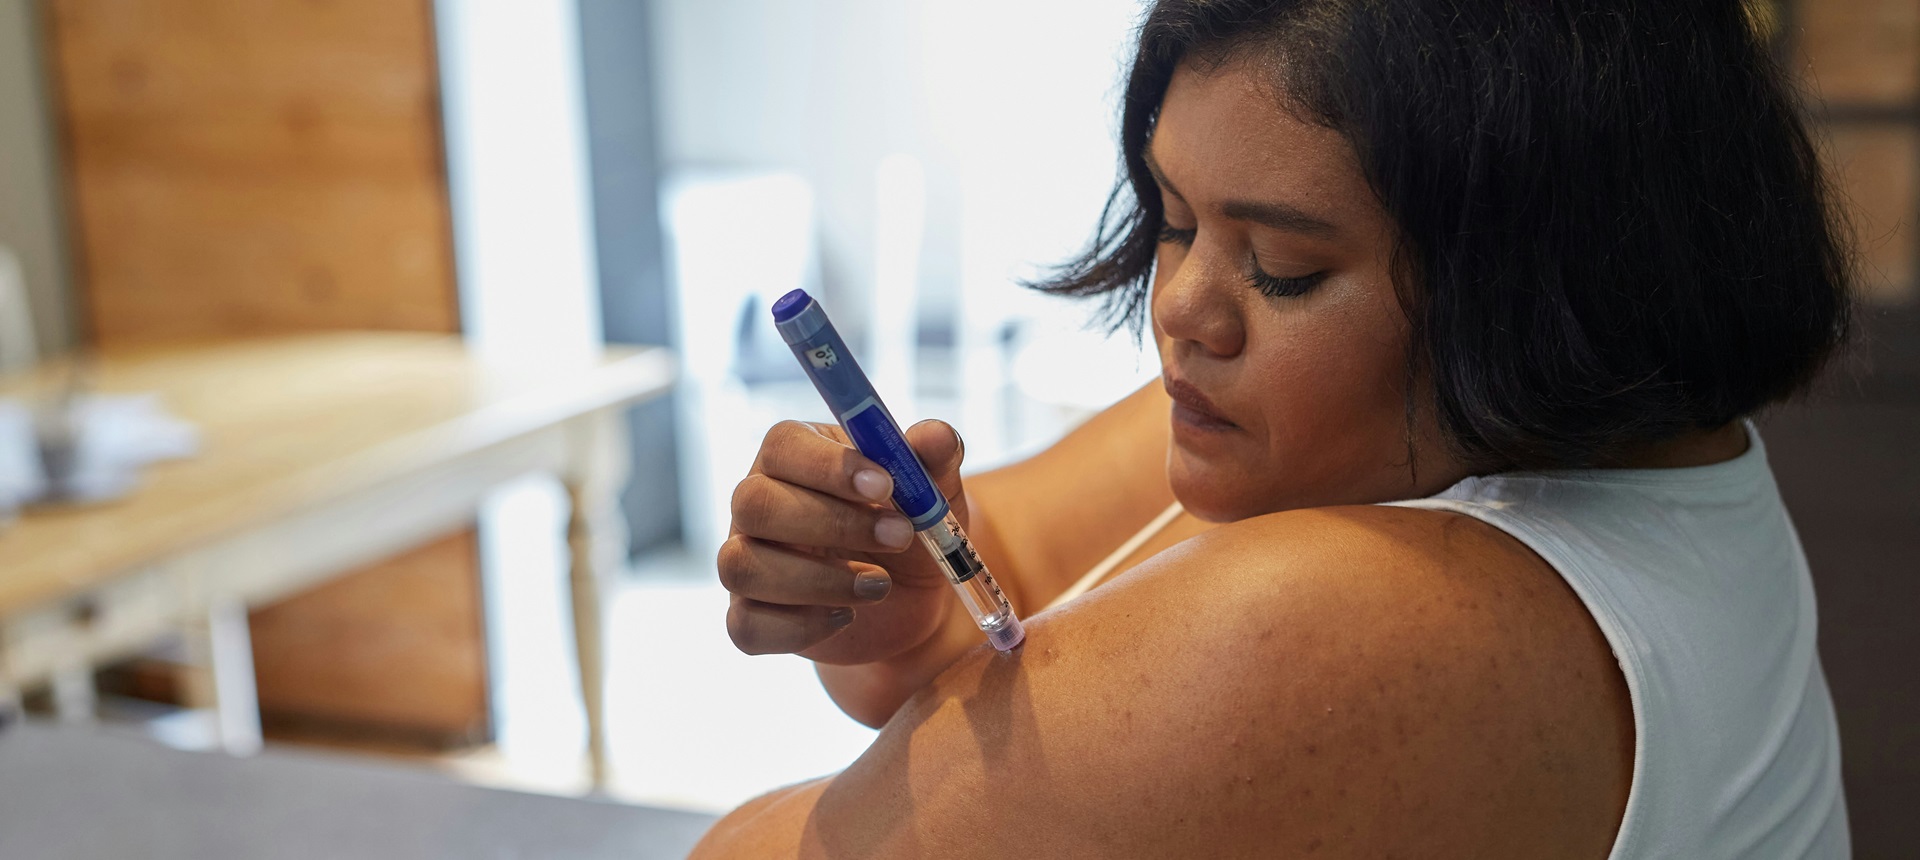 Young woman giving herself an insulin injection. Photo by Sweet Life on Unsplash